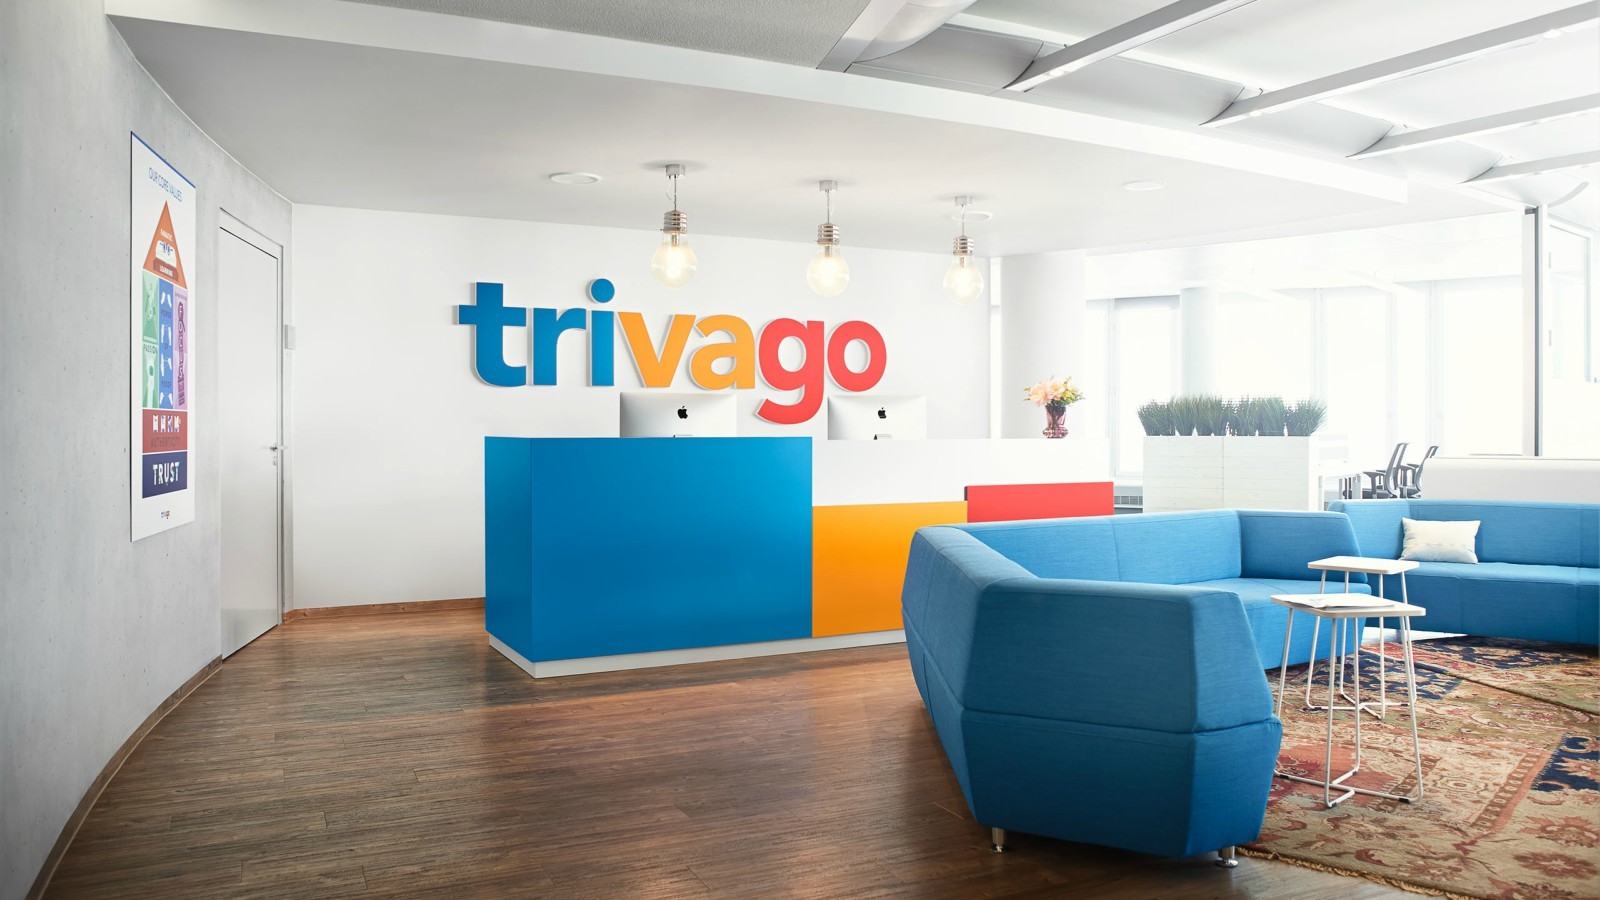 trivago_offices_reception.jpg?mtime=20171218172049#asset:72437